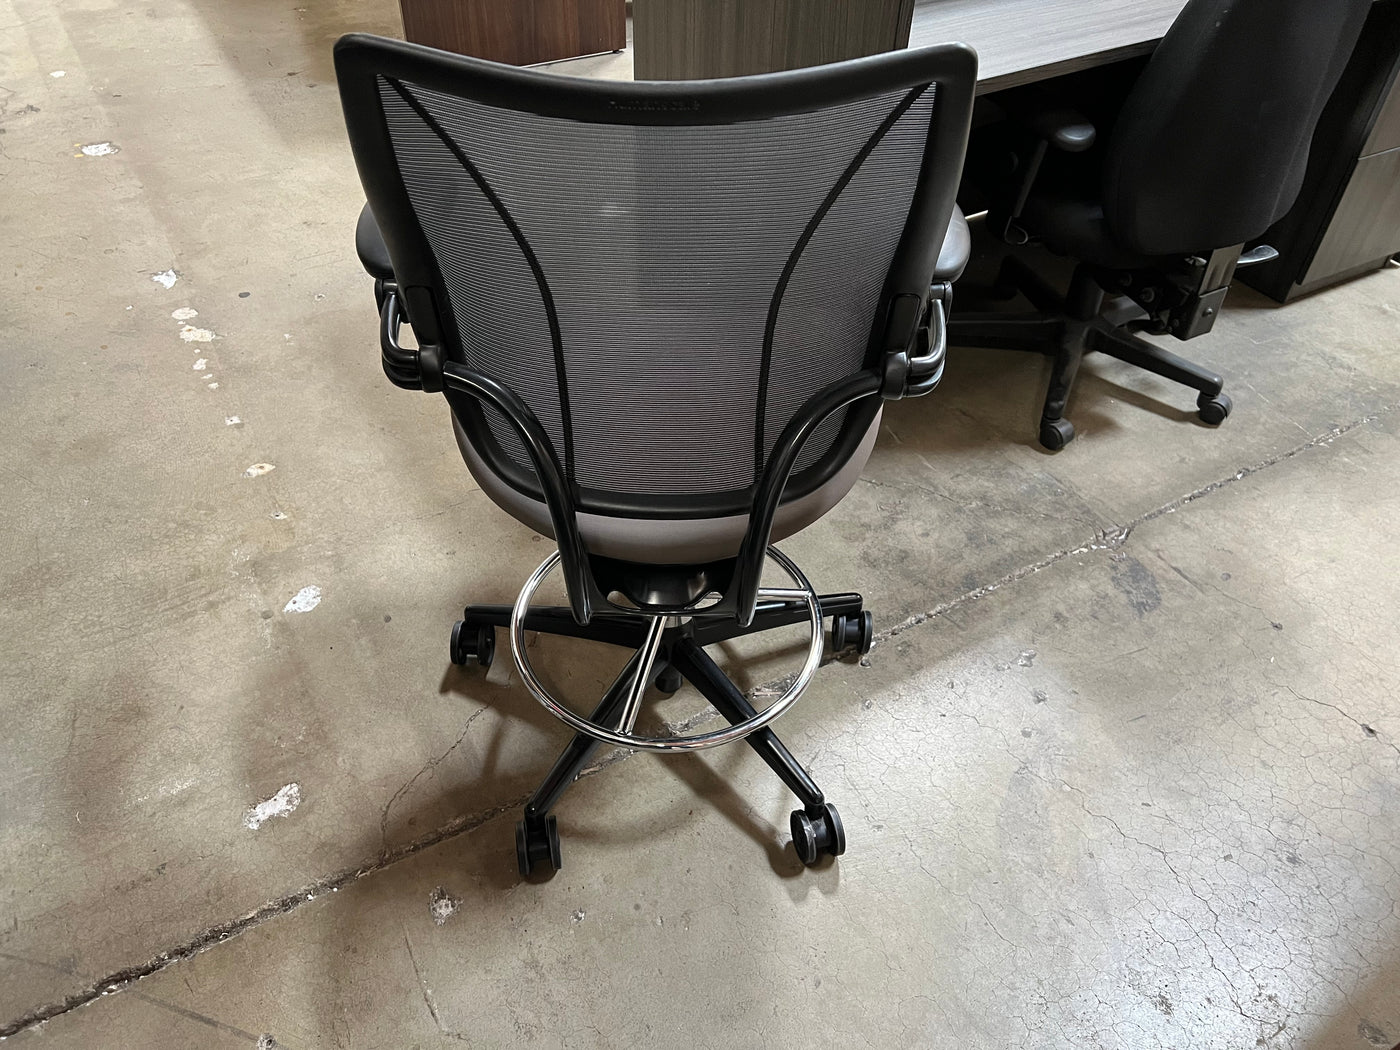 SEVERAL PRE-OWNED HUMANSCALE LIBERTY TASK AND DRAFTING CHAIRS - Miramar Office